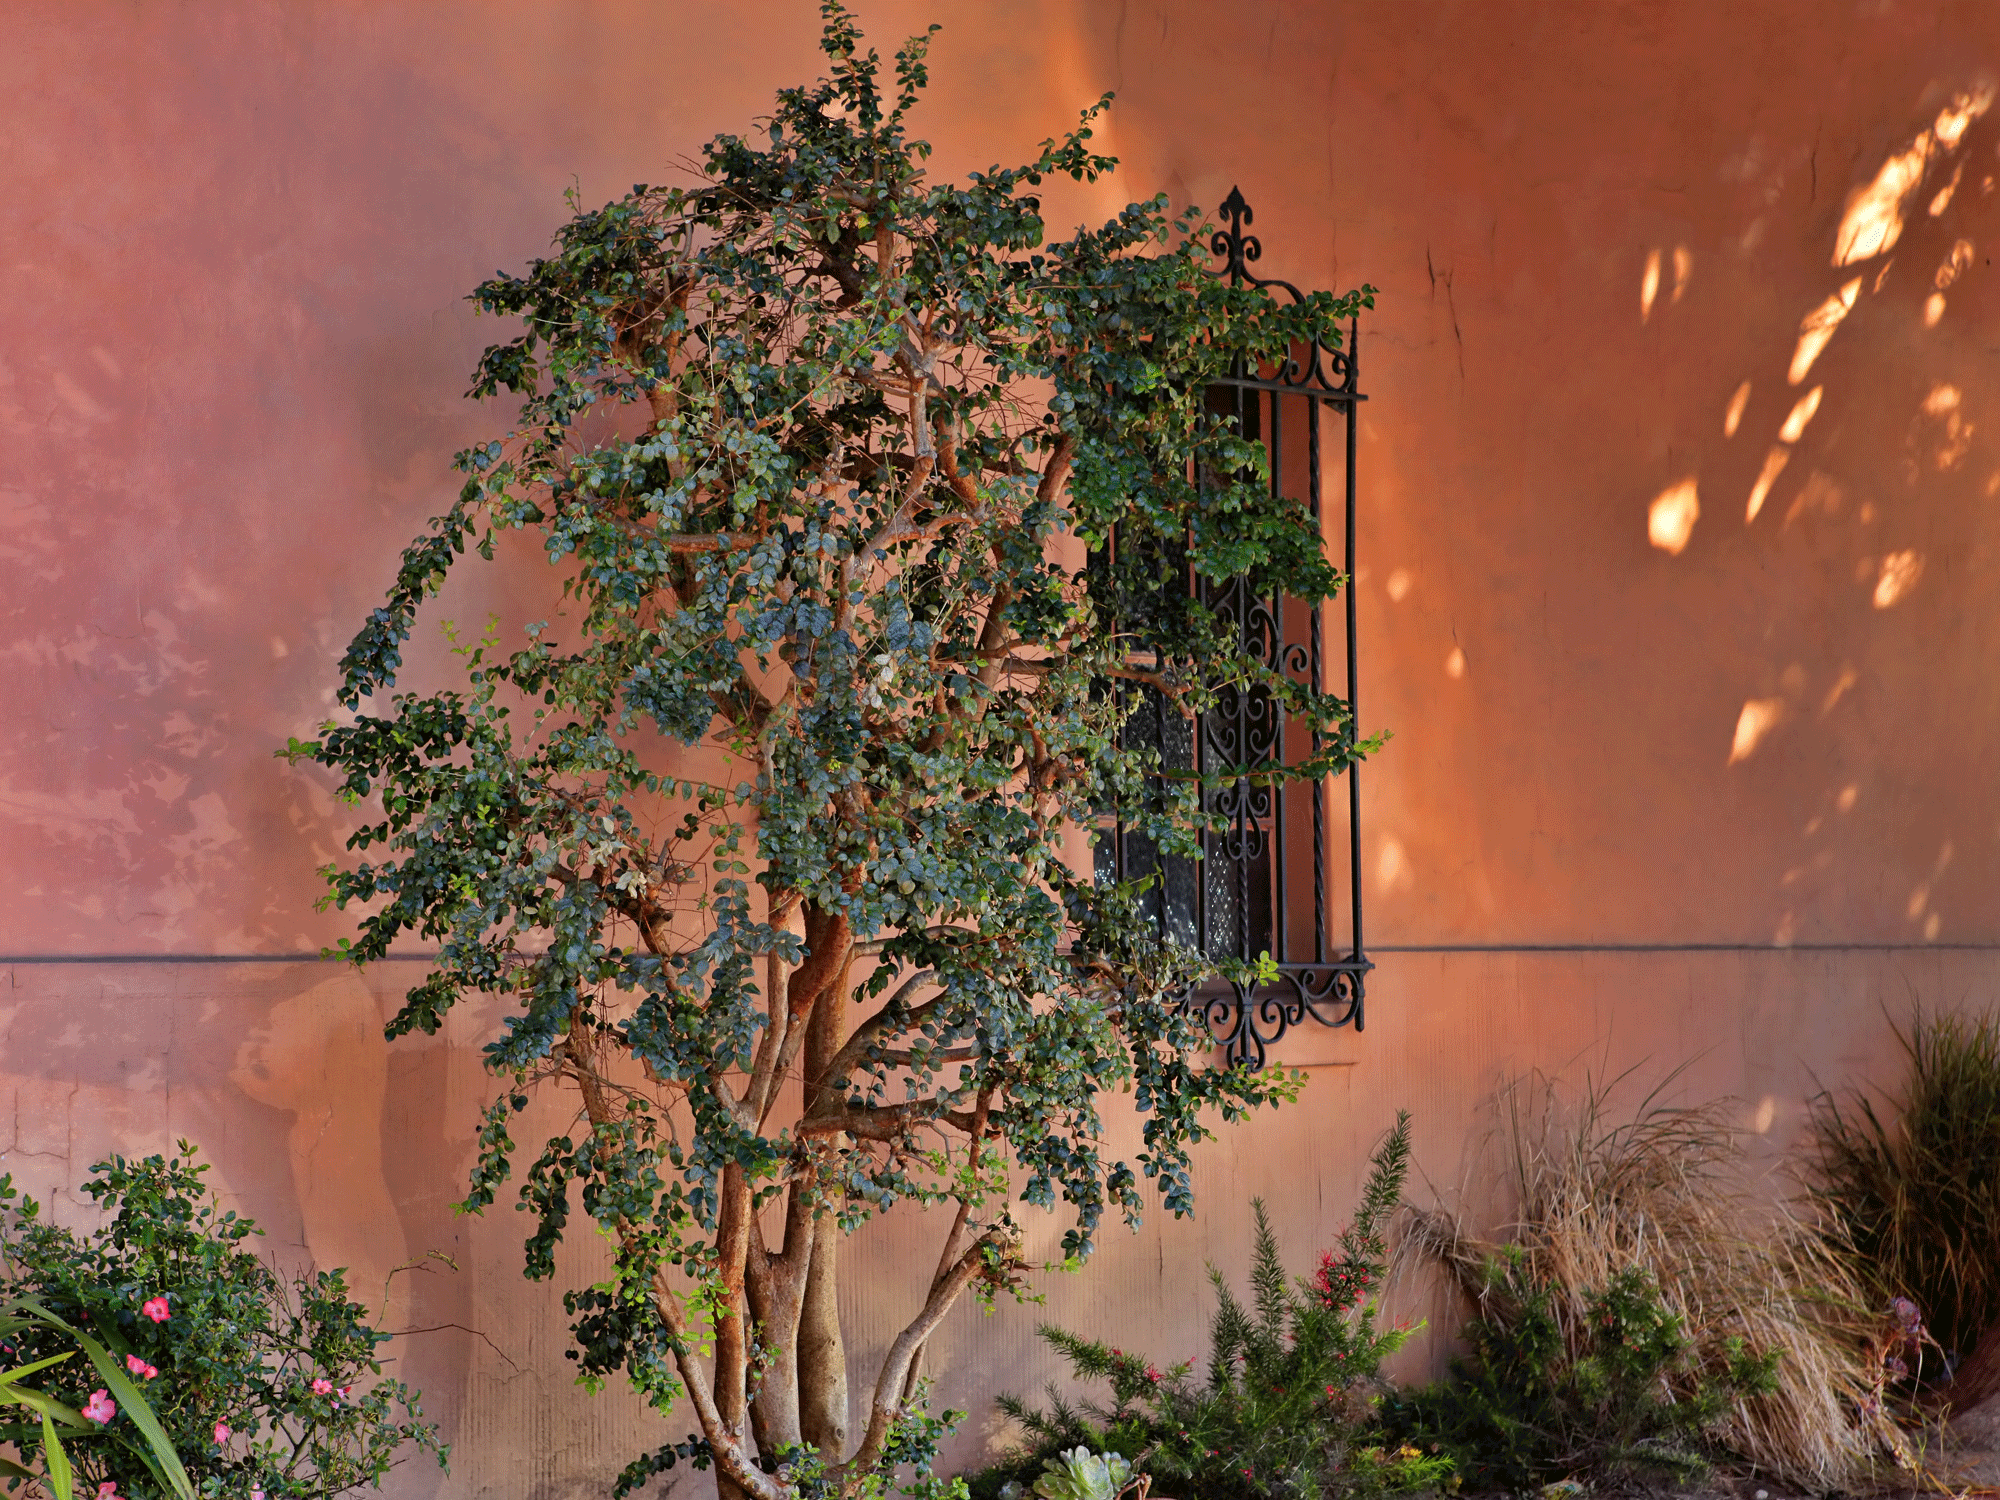 terracotta painted wall with plants and tree